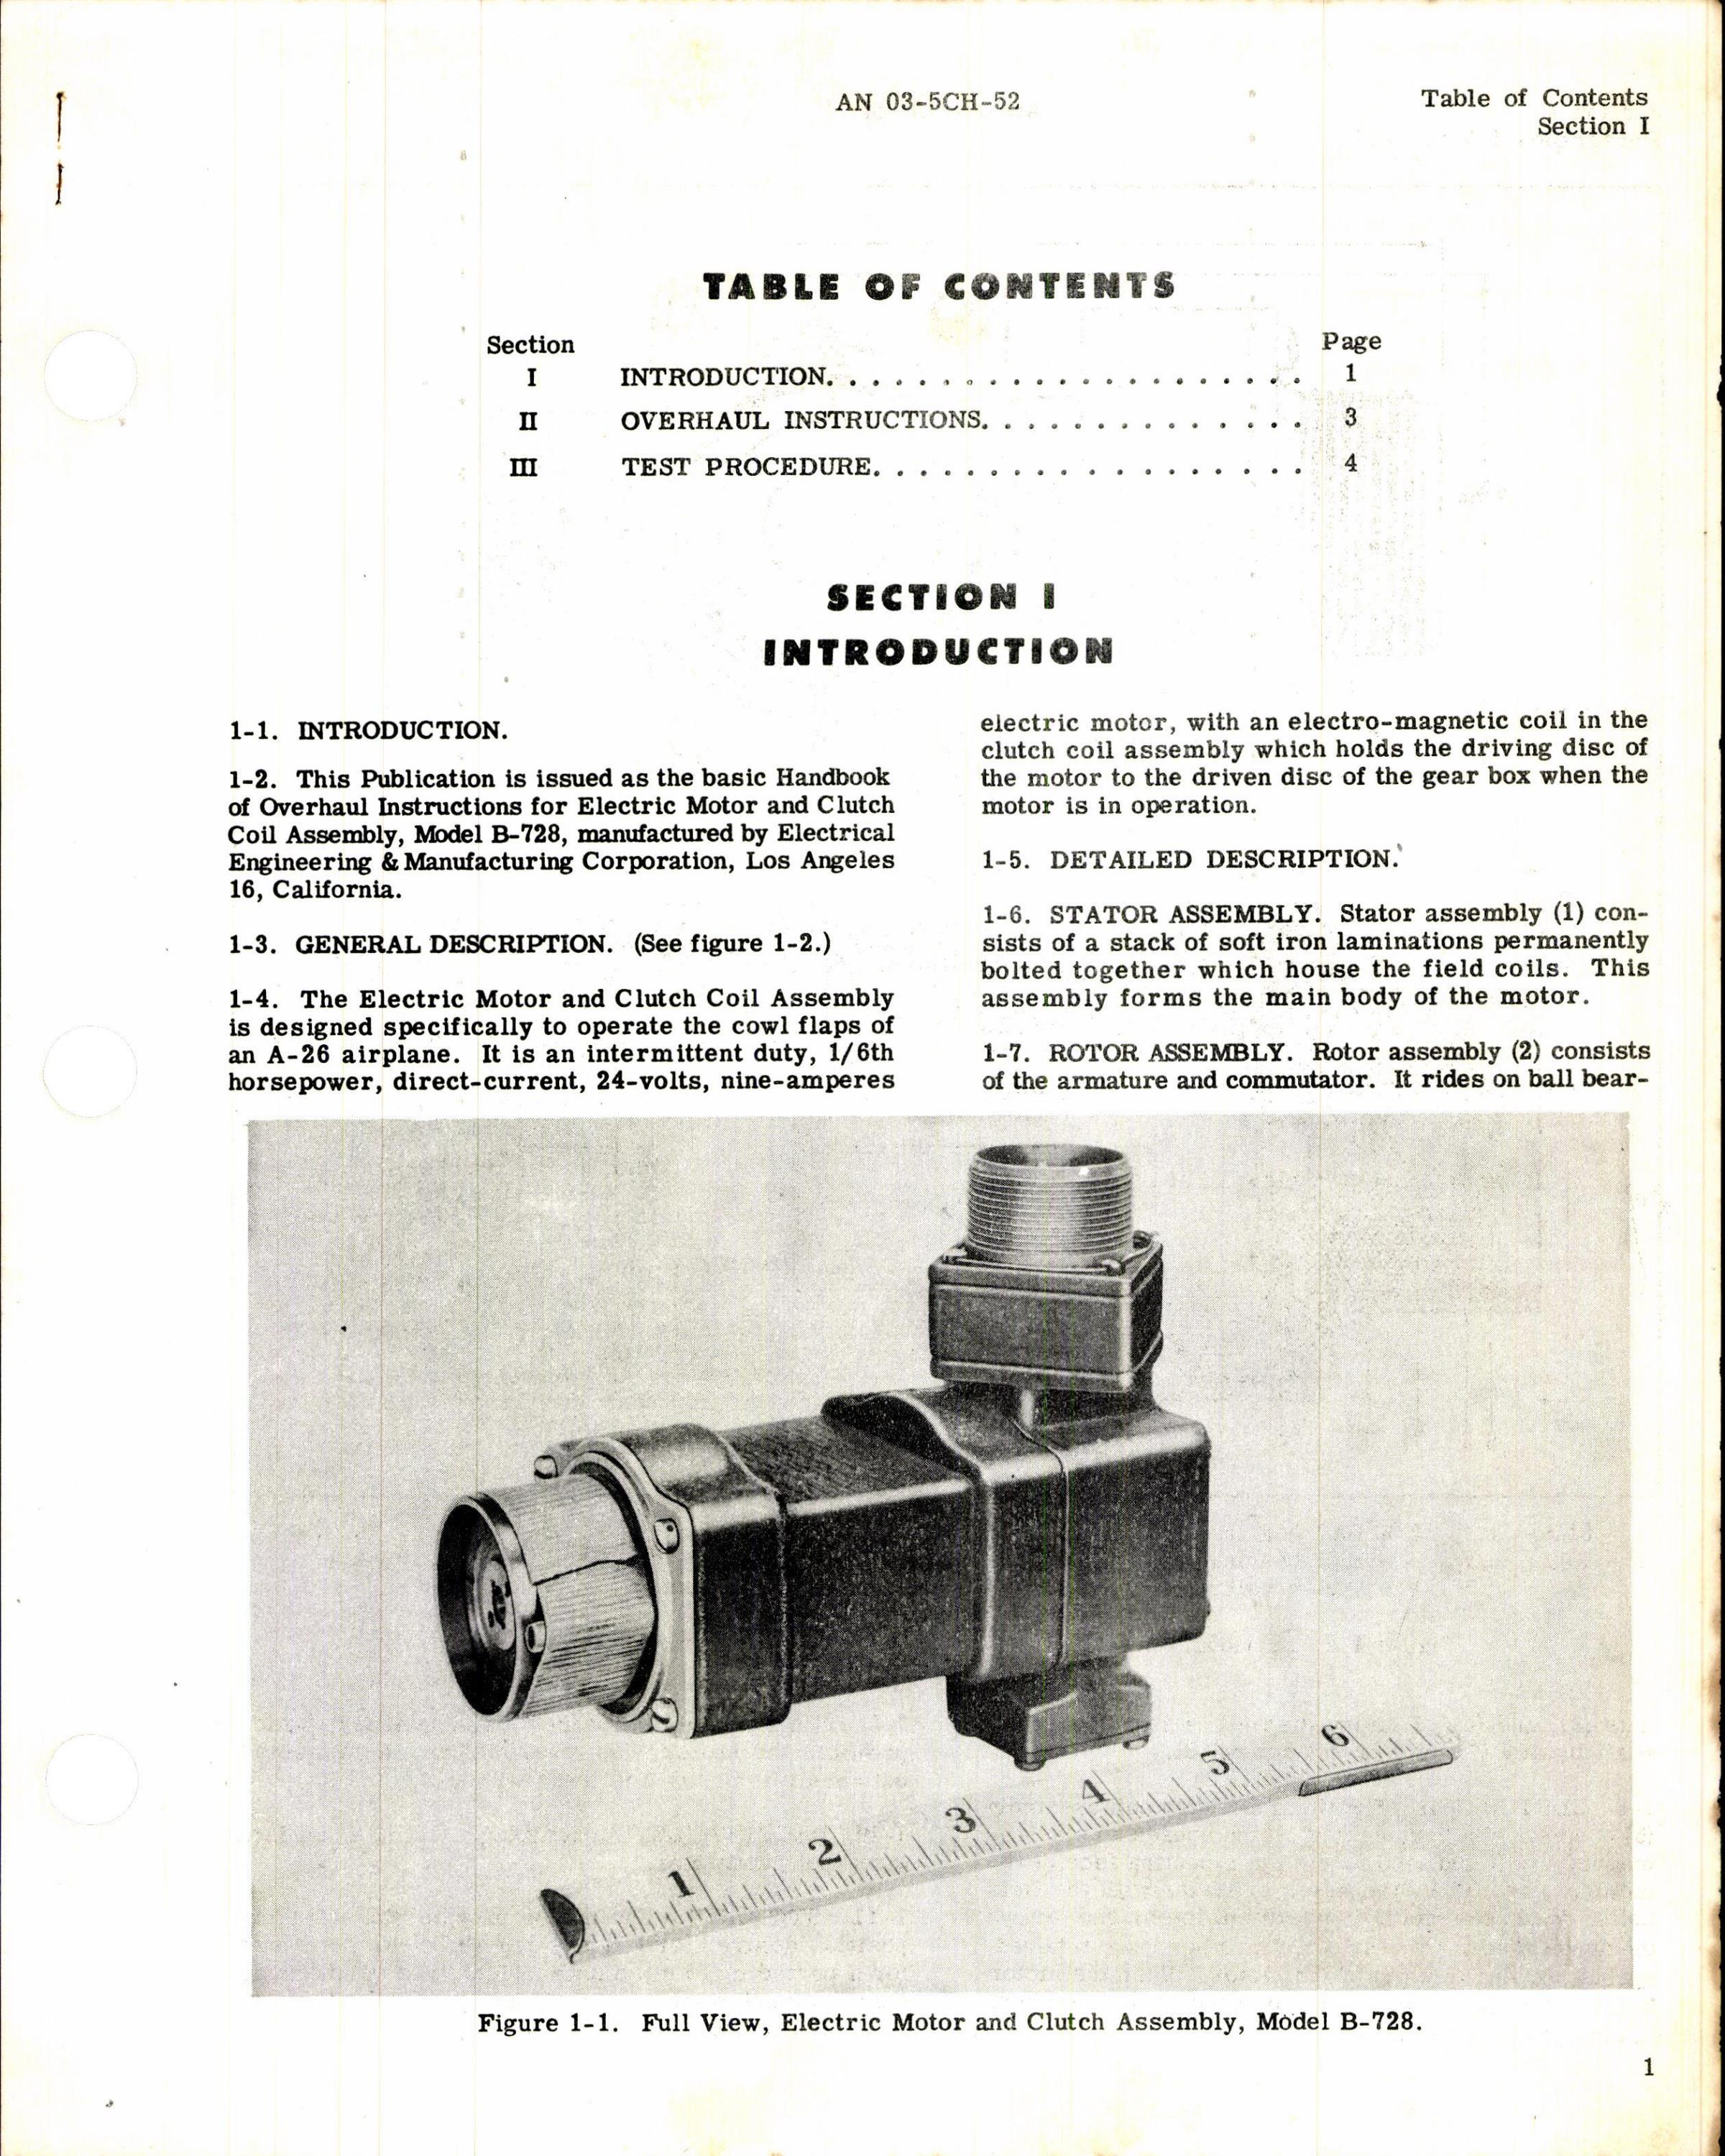 Sample page 3 from AirCorps Library document: Overhaul Instructions for Electric Motor and Clutch Assembly Model B-728